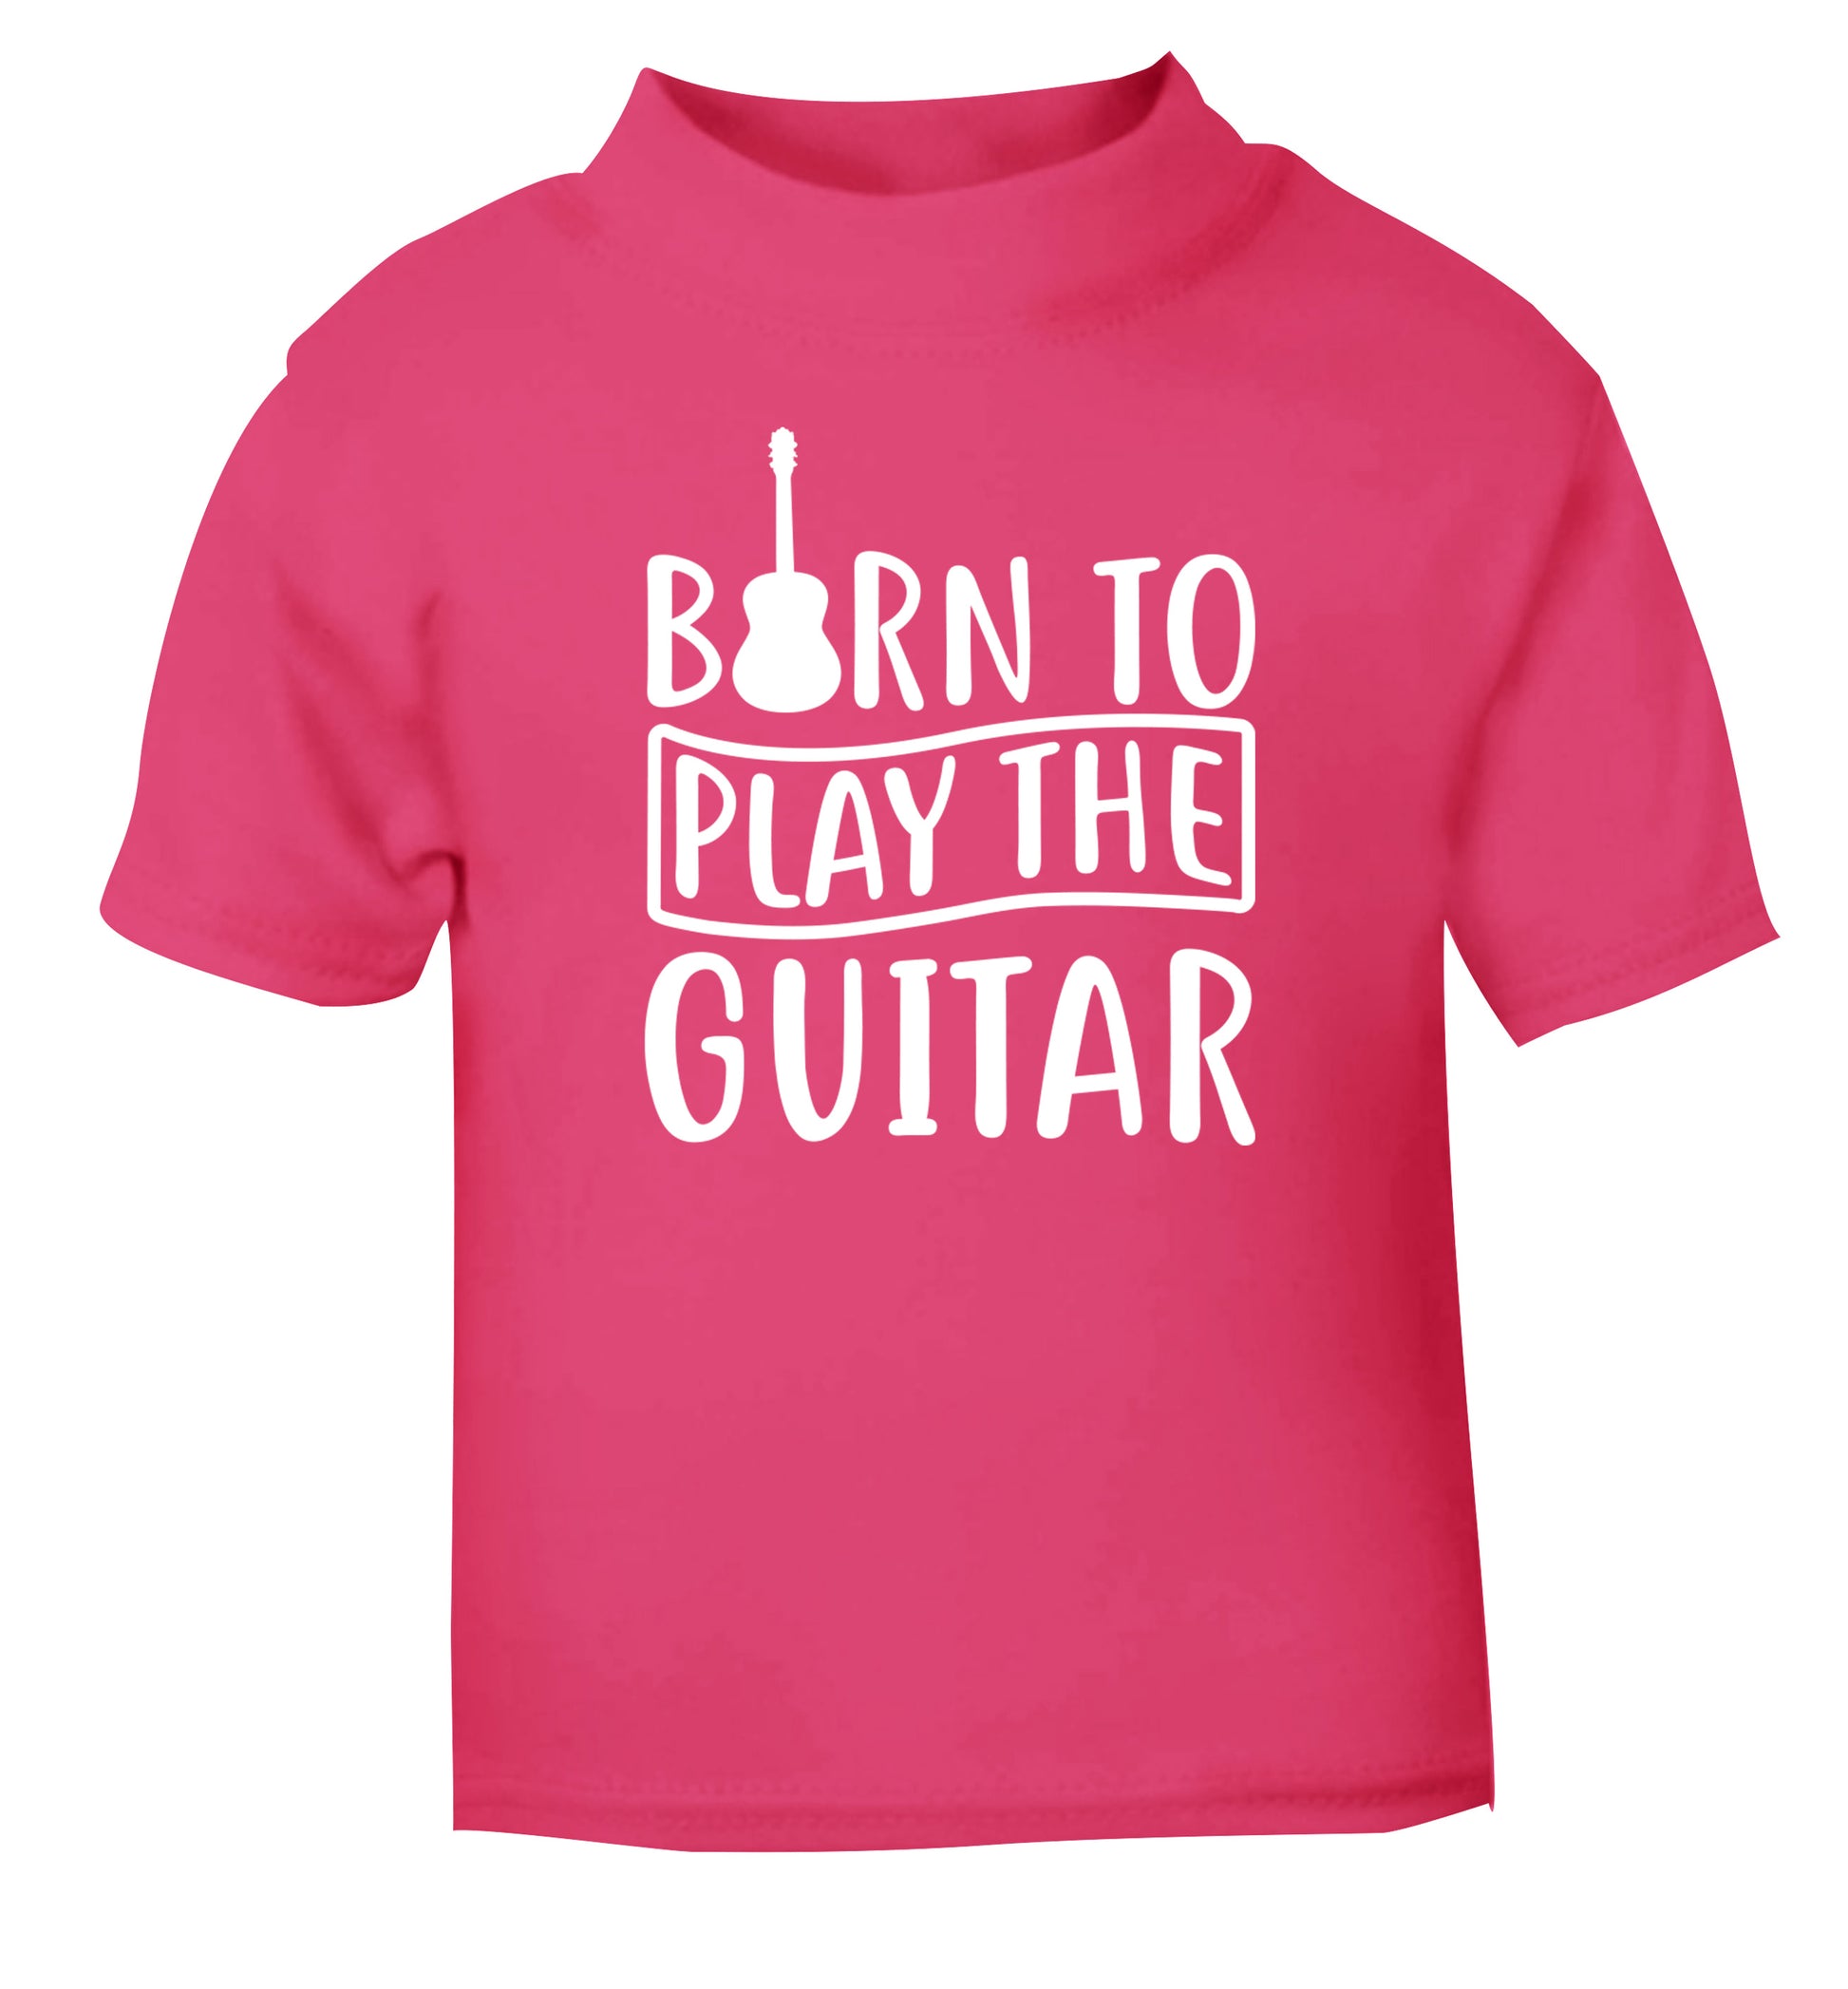 Born to play the guitar pink Baby Toddler Tshirt 2 Years